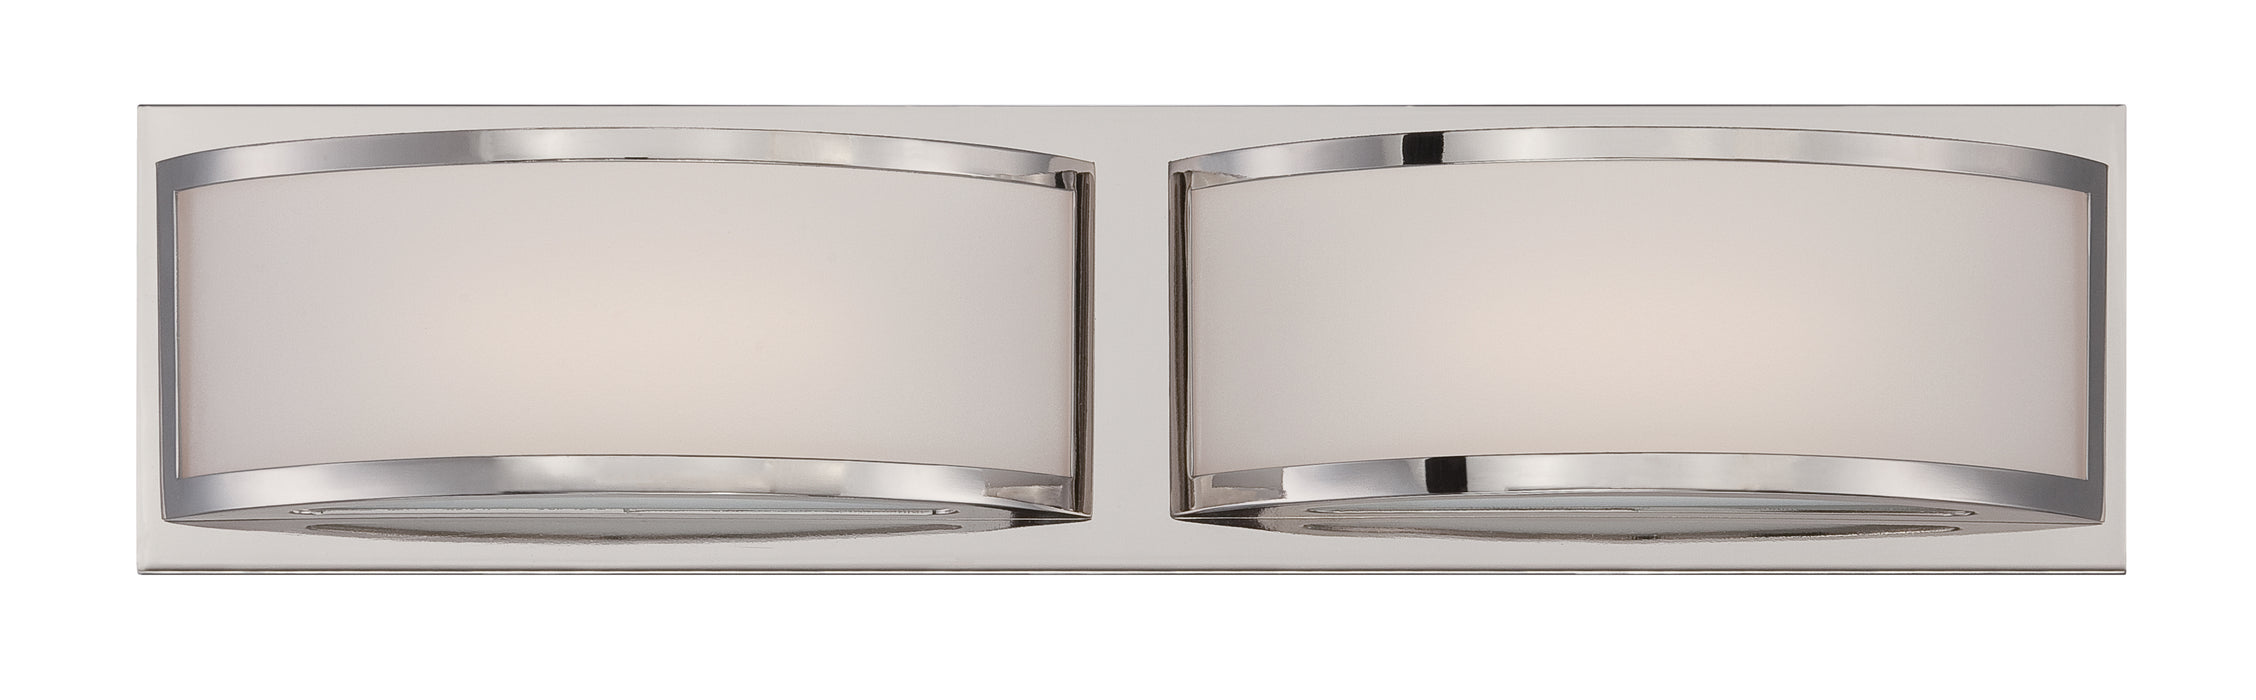 SATCO/NUVO Mercer 2 LED Wall Sconce (62-312)